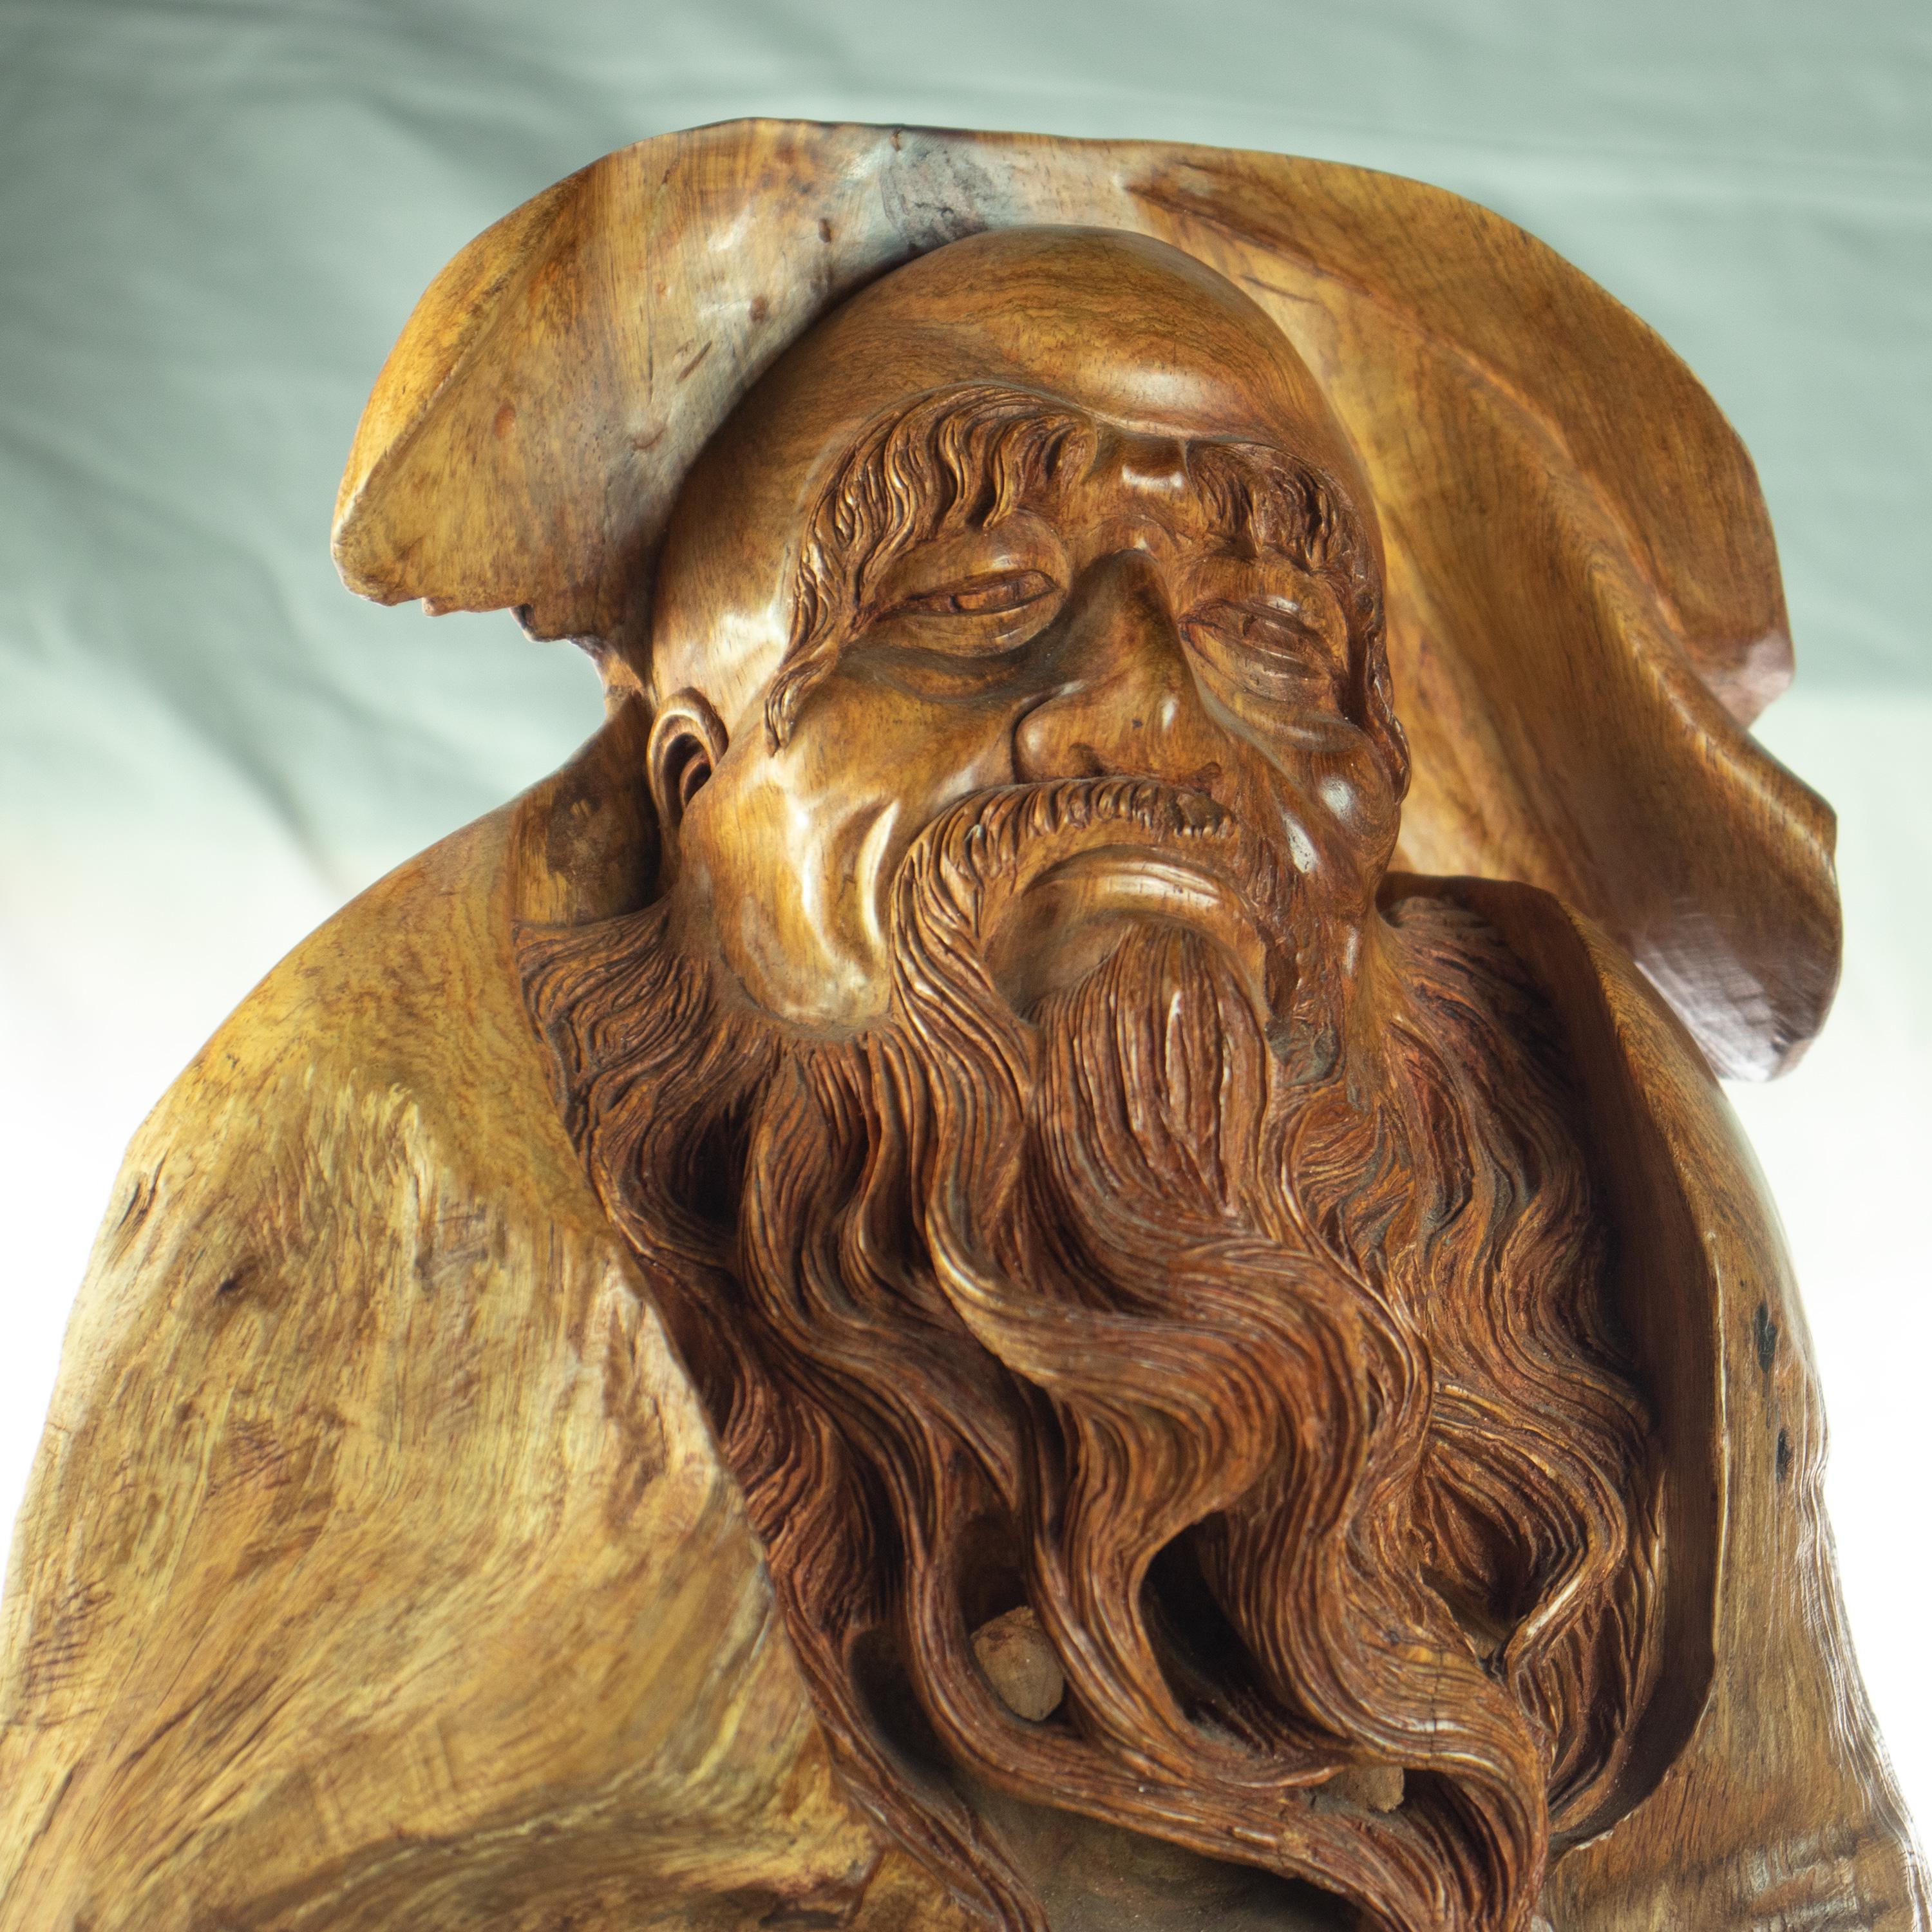 Old Wise Man Antique Handmade Carved Wood Figure Asian Traditional Art Sculpture In Excellent Condition For Sale In Milano, IT